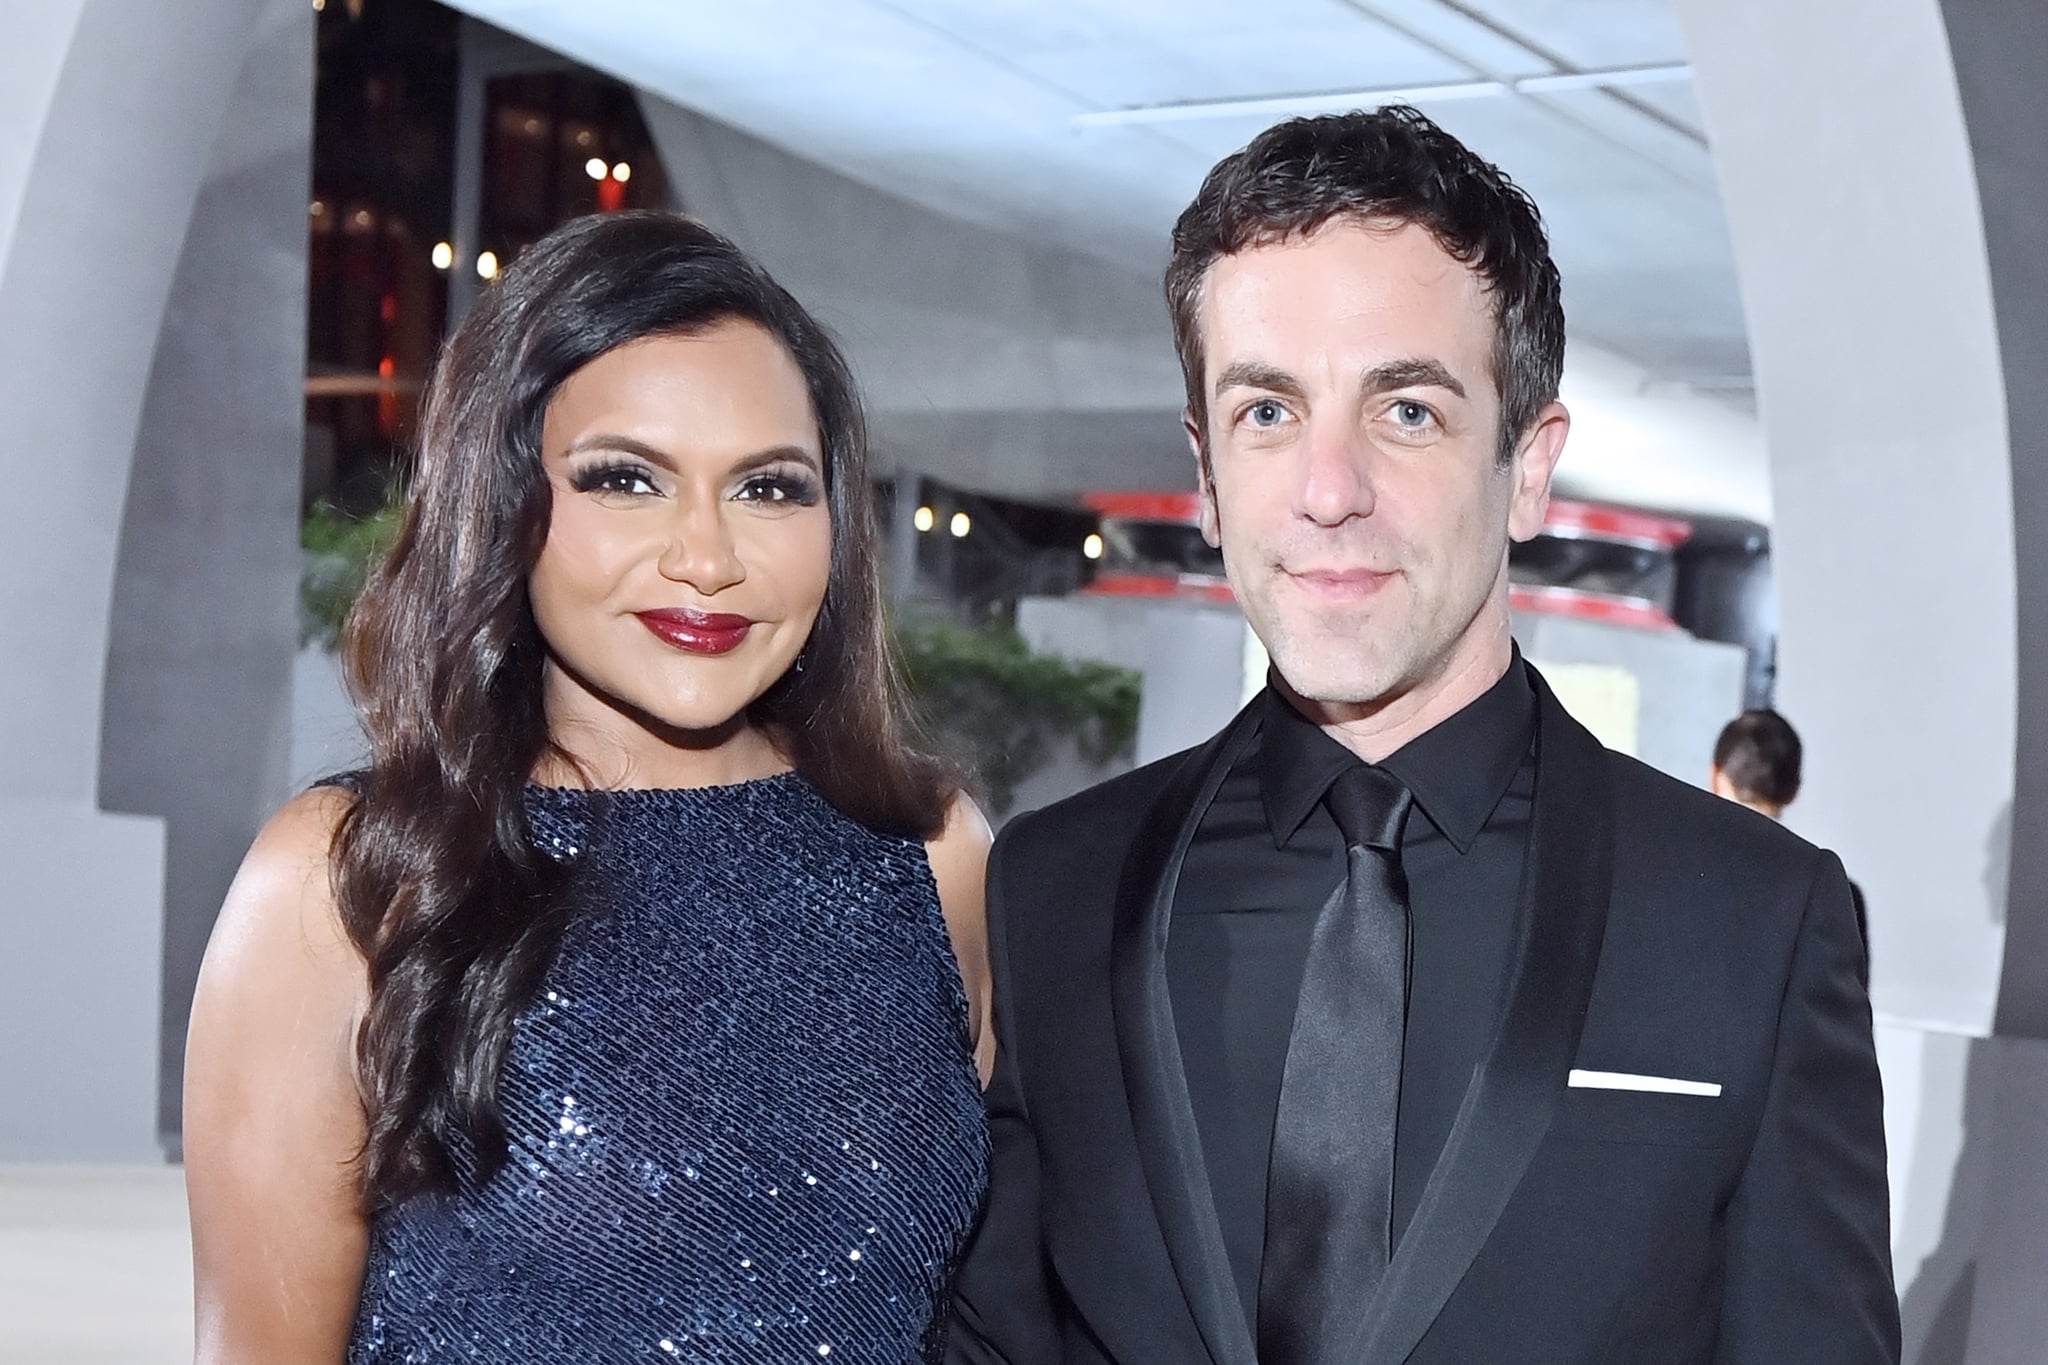 LOS ANGELES, CALIFORNIA - OCTOBER 15: (L-R) Mindy Kaling and B. J. Novak attend the Academy Museum of Motion Pictures 2nd Annual Gala presented by Rolex at Academy Museum of Motion Pictures on October 15, 2022 in Los Angeles, California. (Photo by Stefanie Keenan/Getty Images for Academy Museum of Motion Pictures)